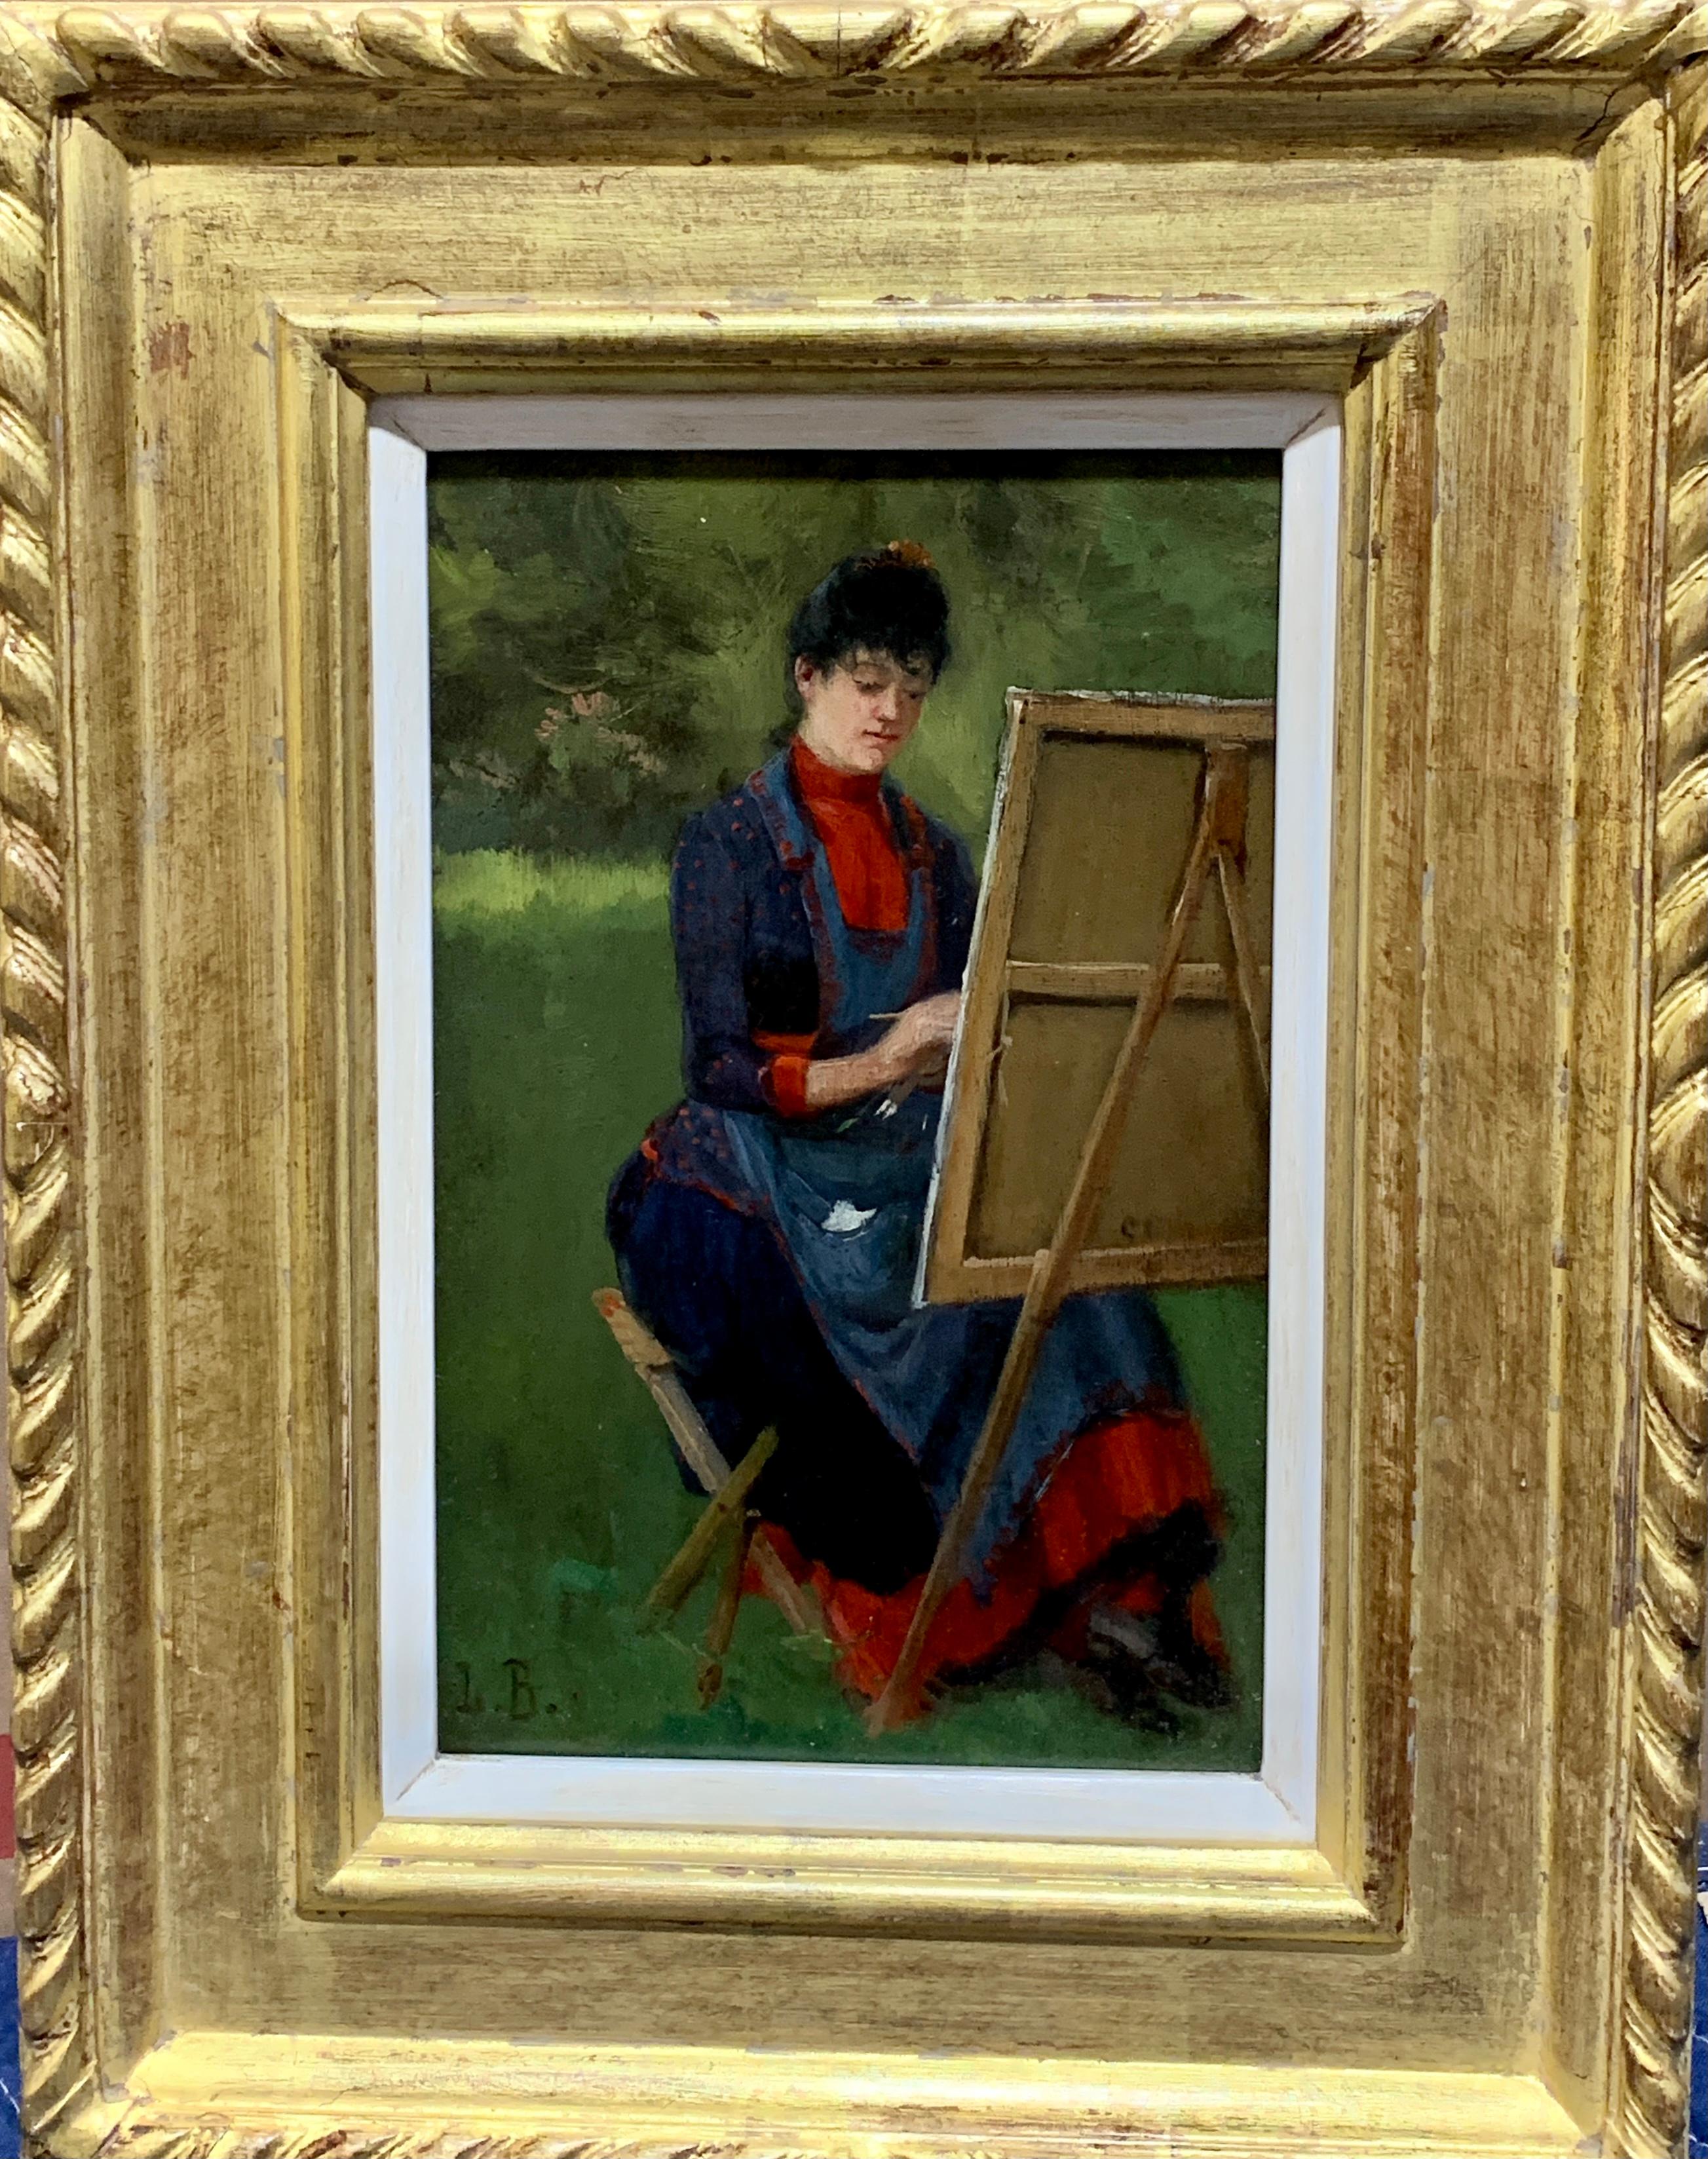 Study of a Woman artist painting by her easel in a landscape